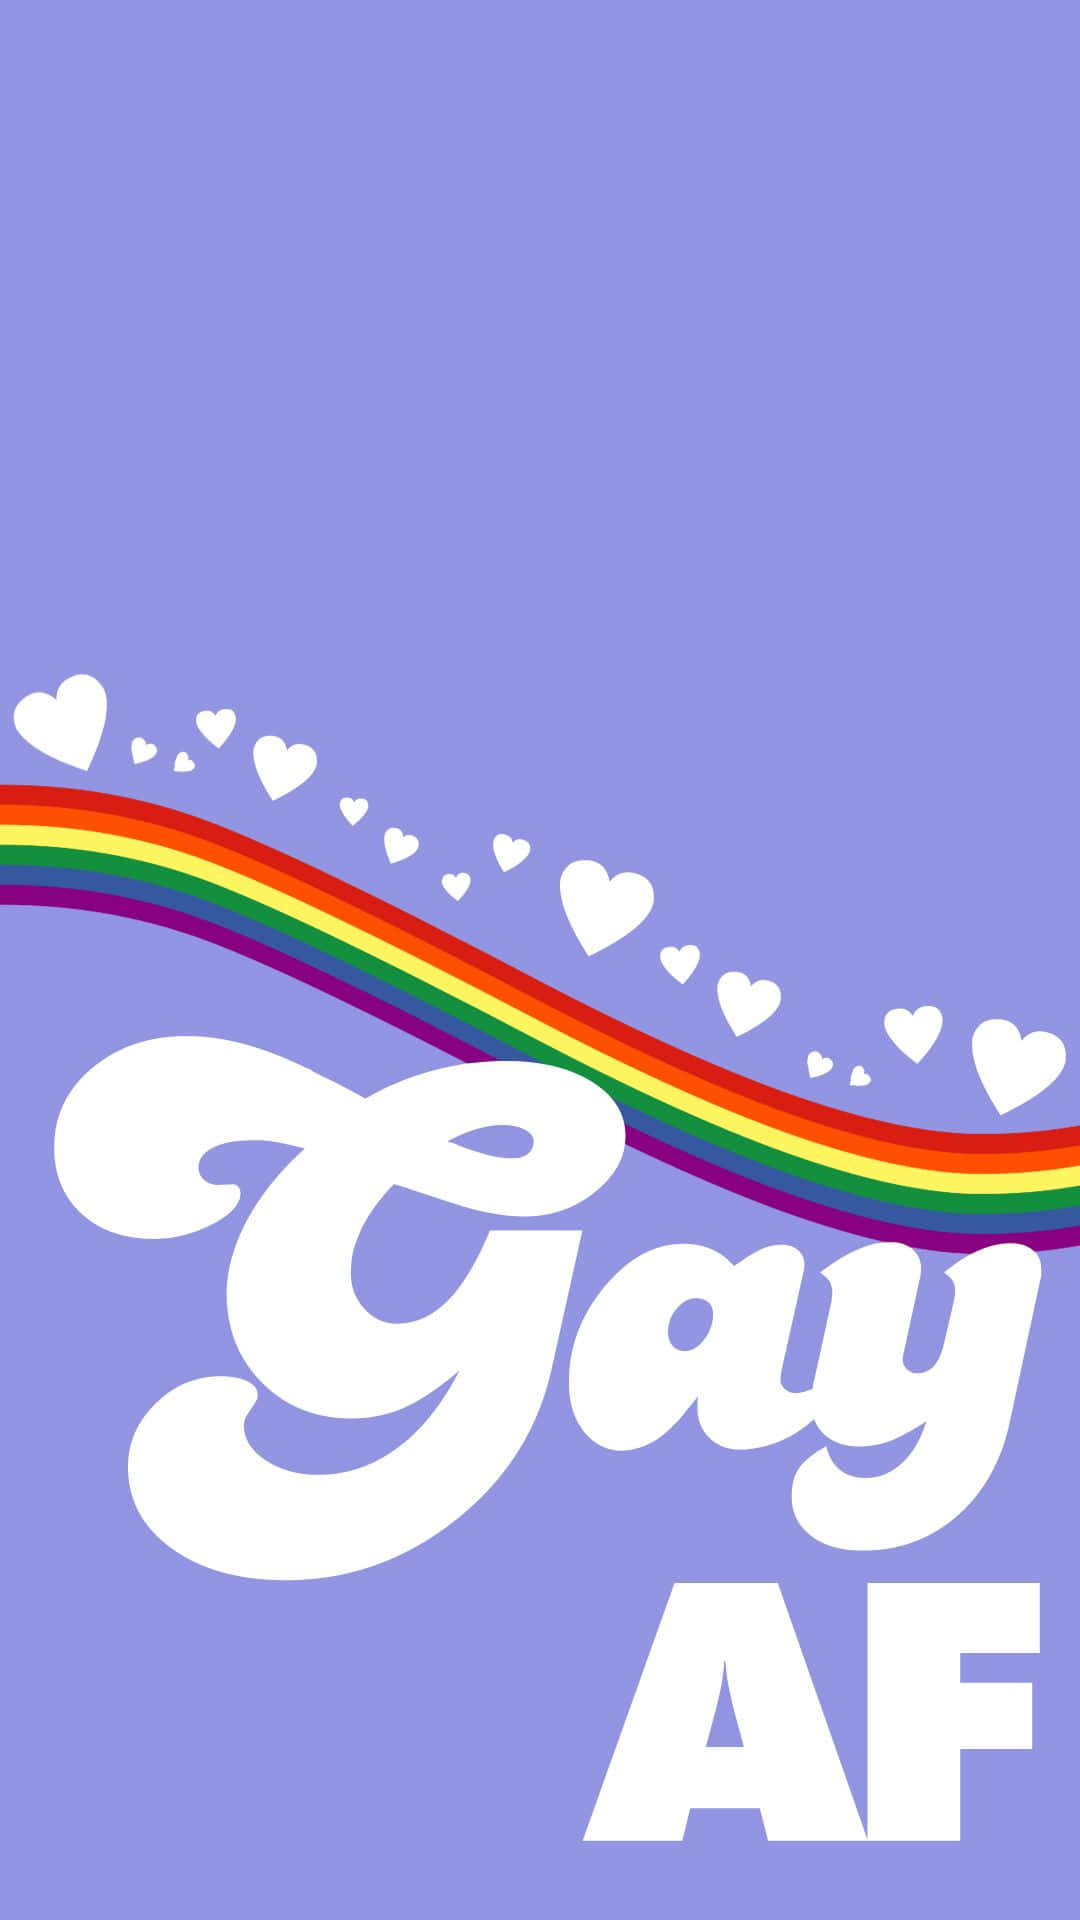 "Proudly declaring my identity to the world: I'm Gay!" Wallpaper